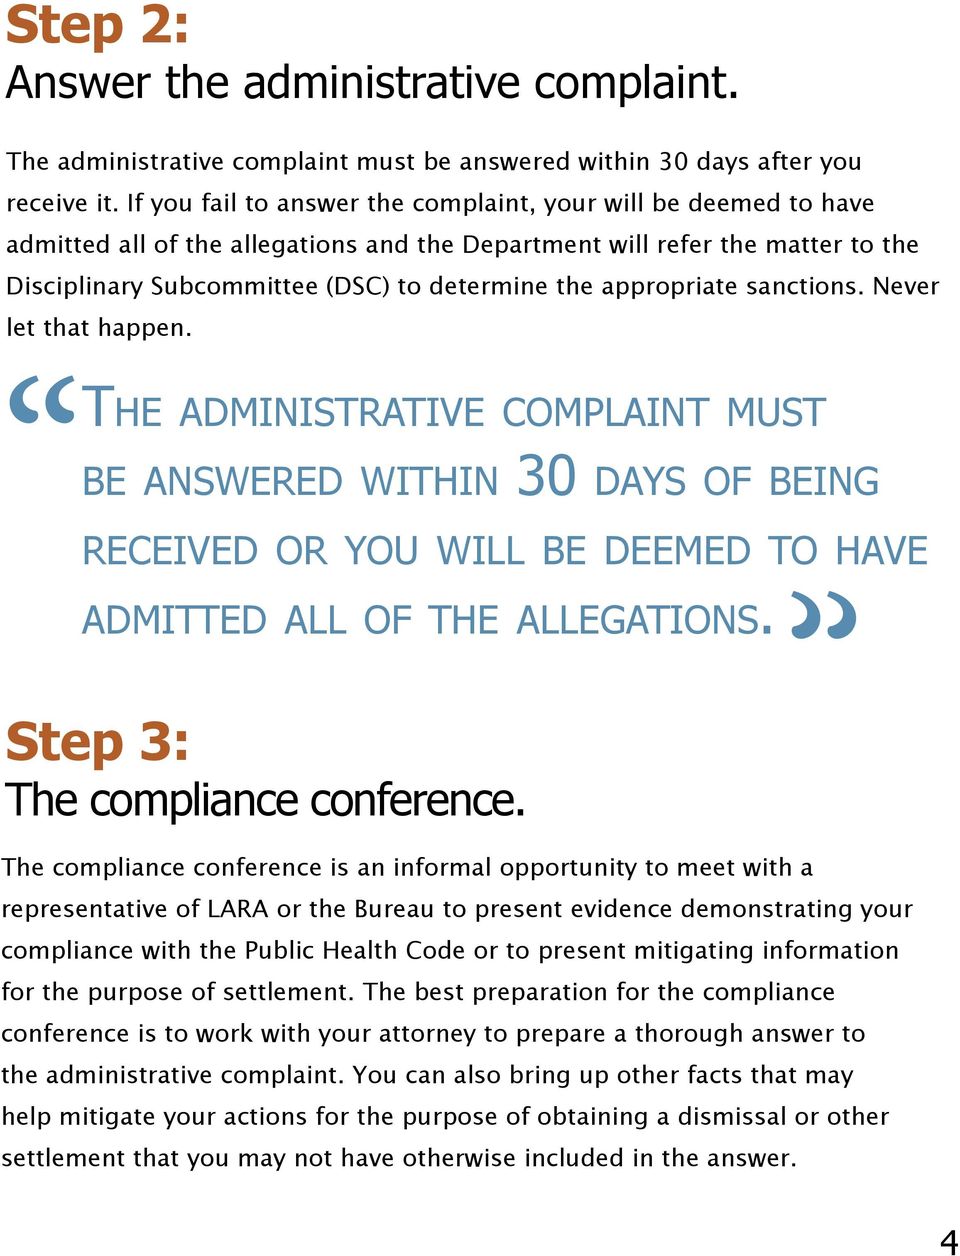 appropriate sanctions. Never let that happen. The administrative complaint must be answered within 30 days of being received or you will be deemed to have admitted all of the allegations.